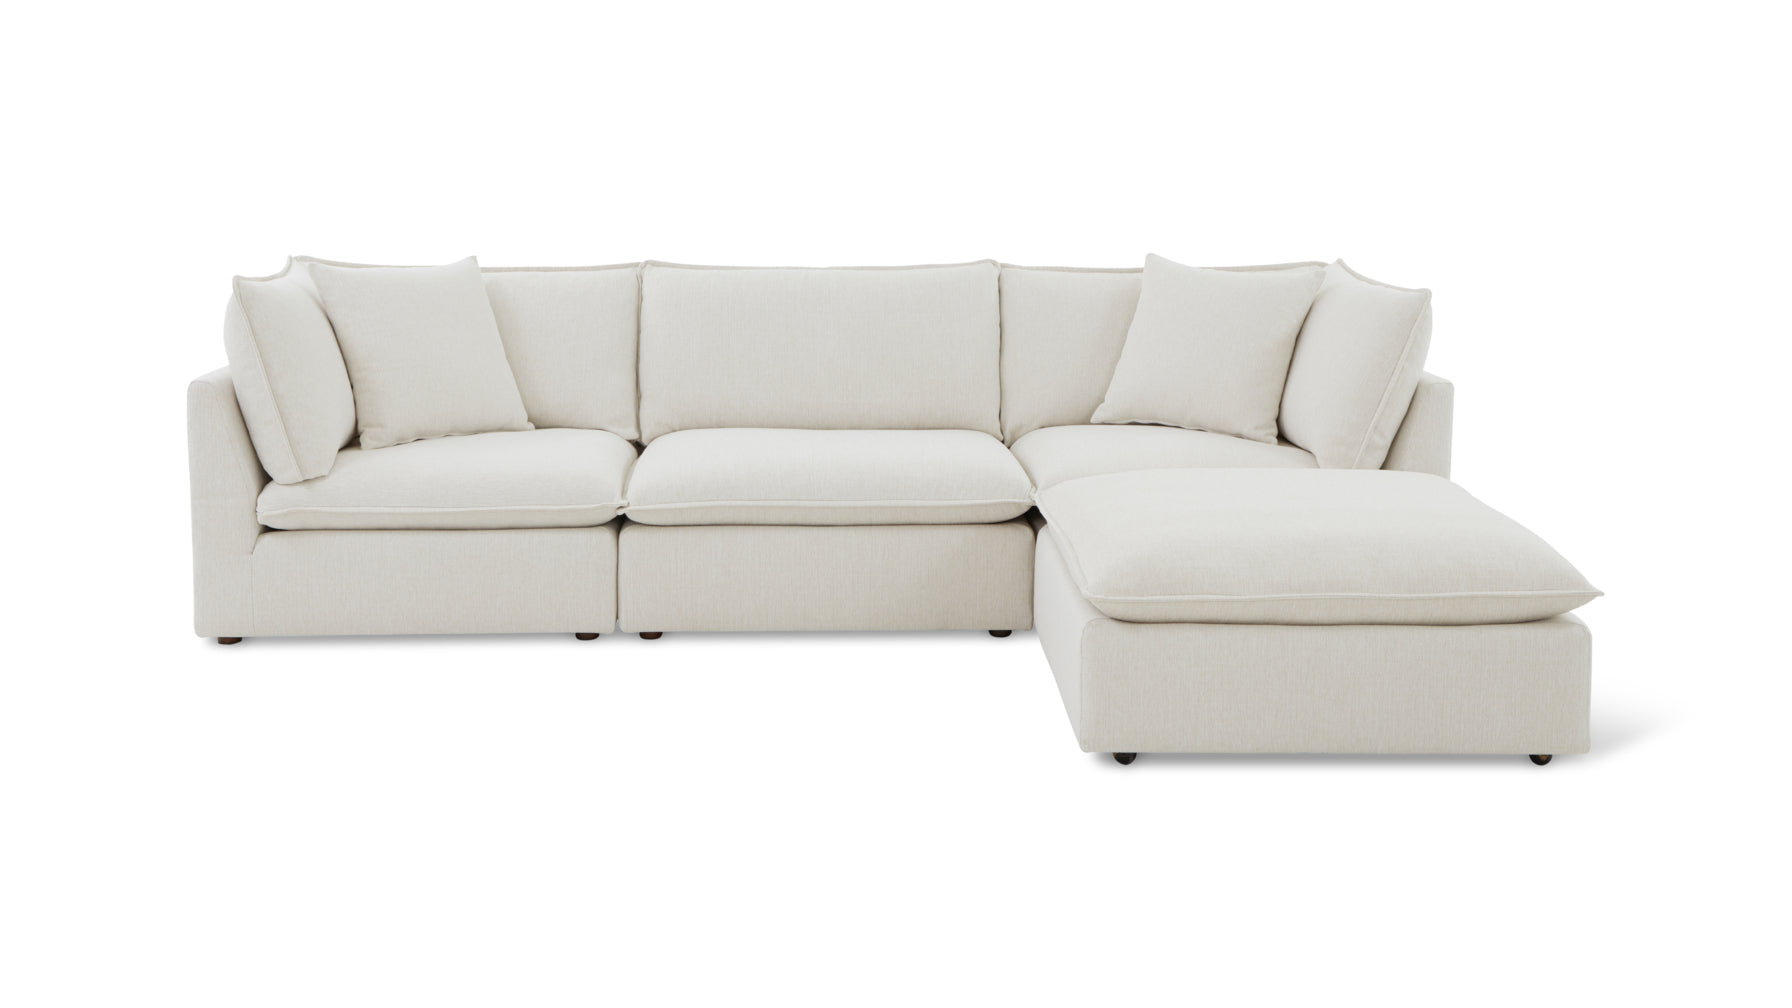 Chill Time 4-Piece Modular Sectional, Birch - Image 1